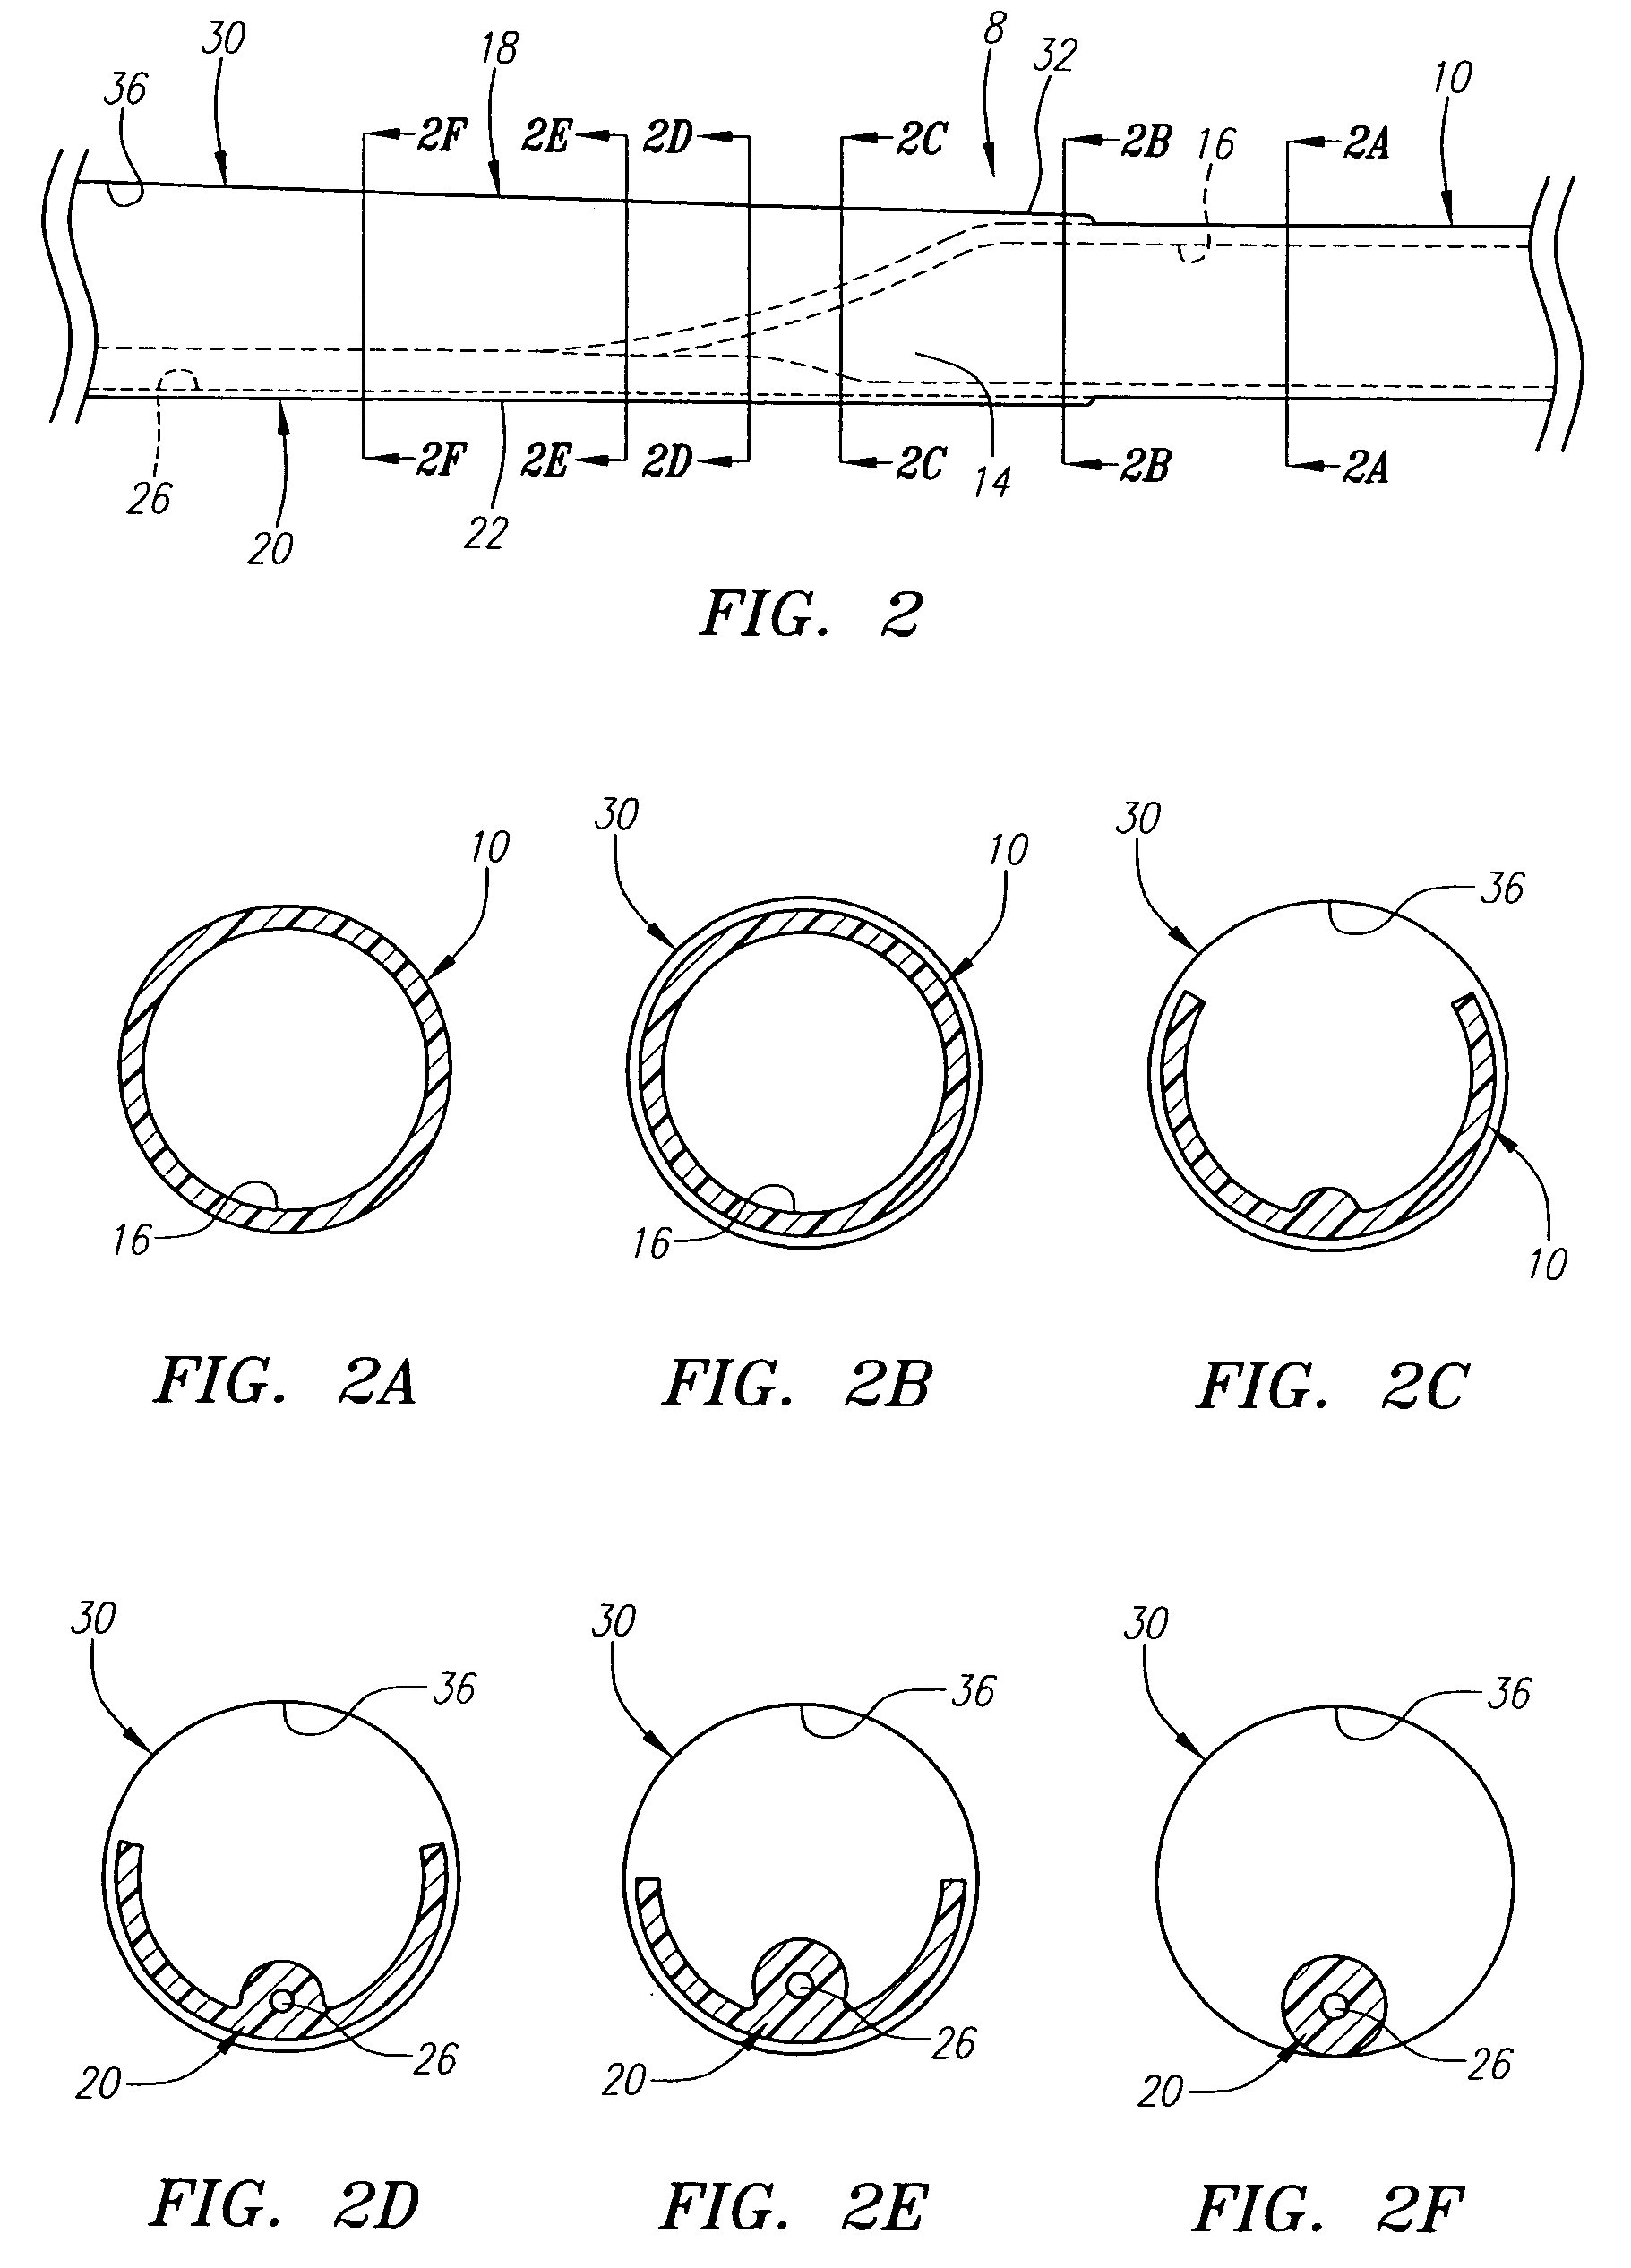 Expandable guide sheath and apparatus and methods for making them